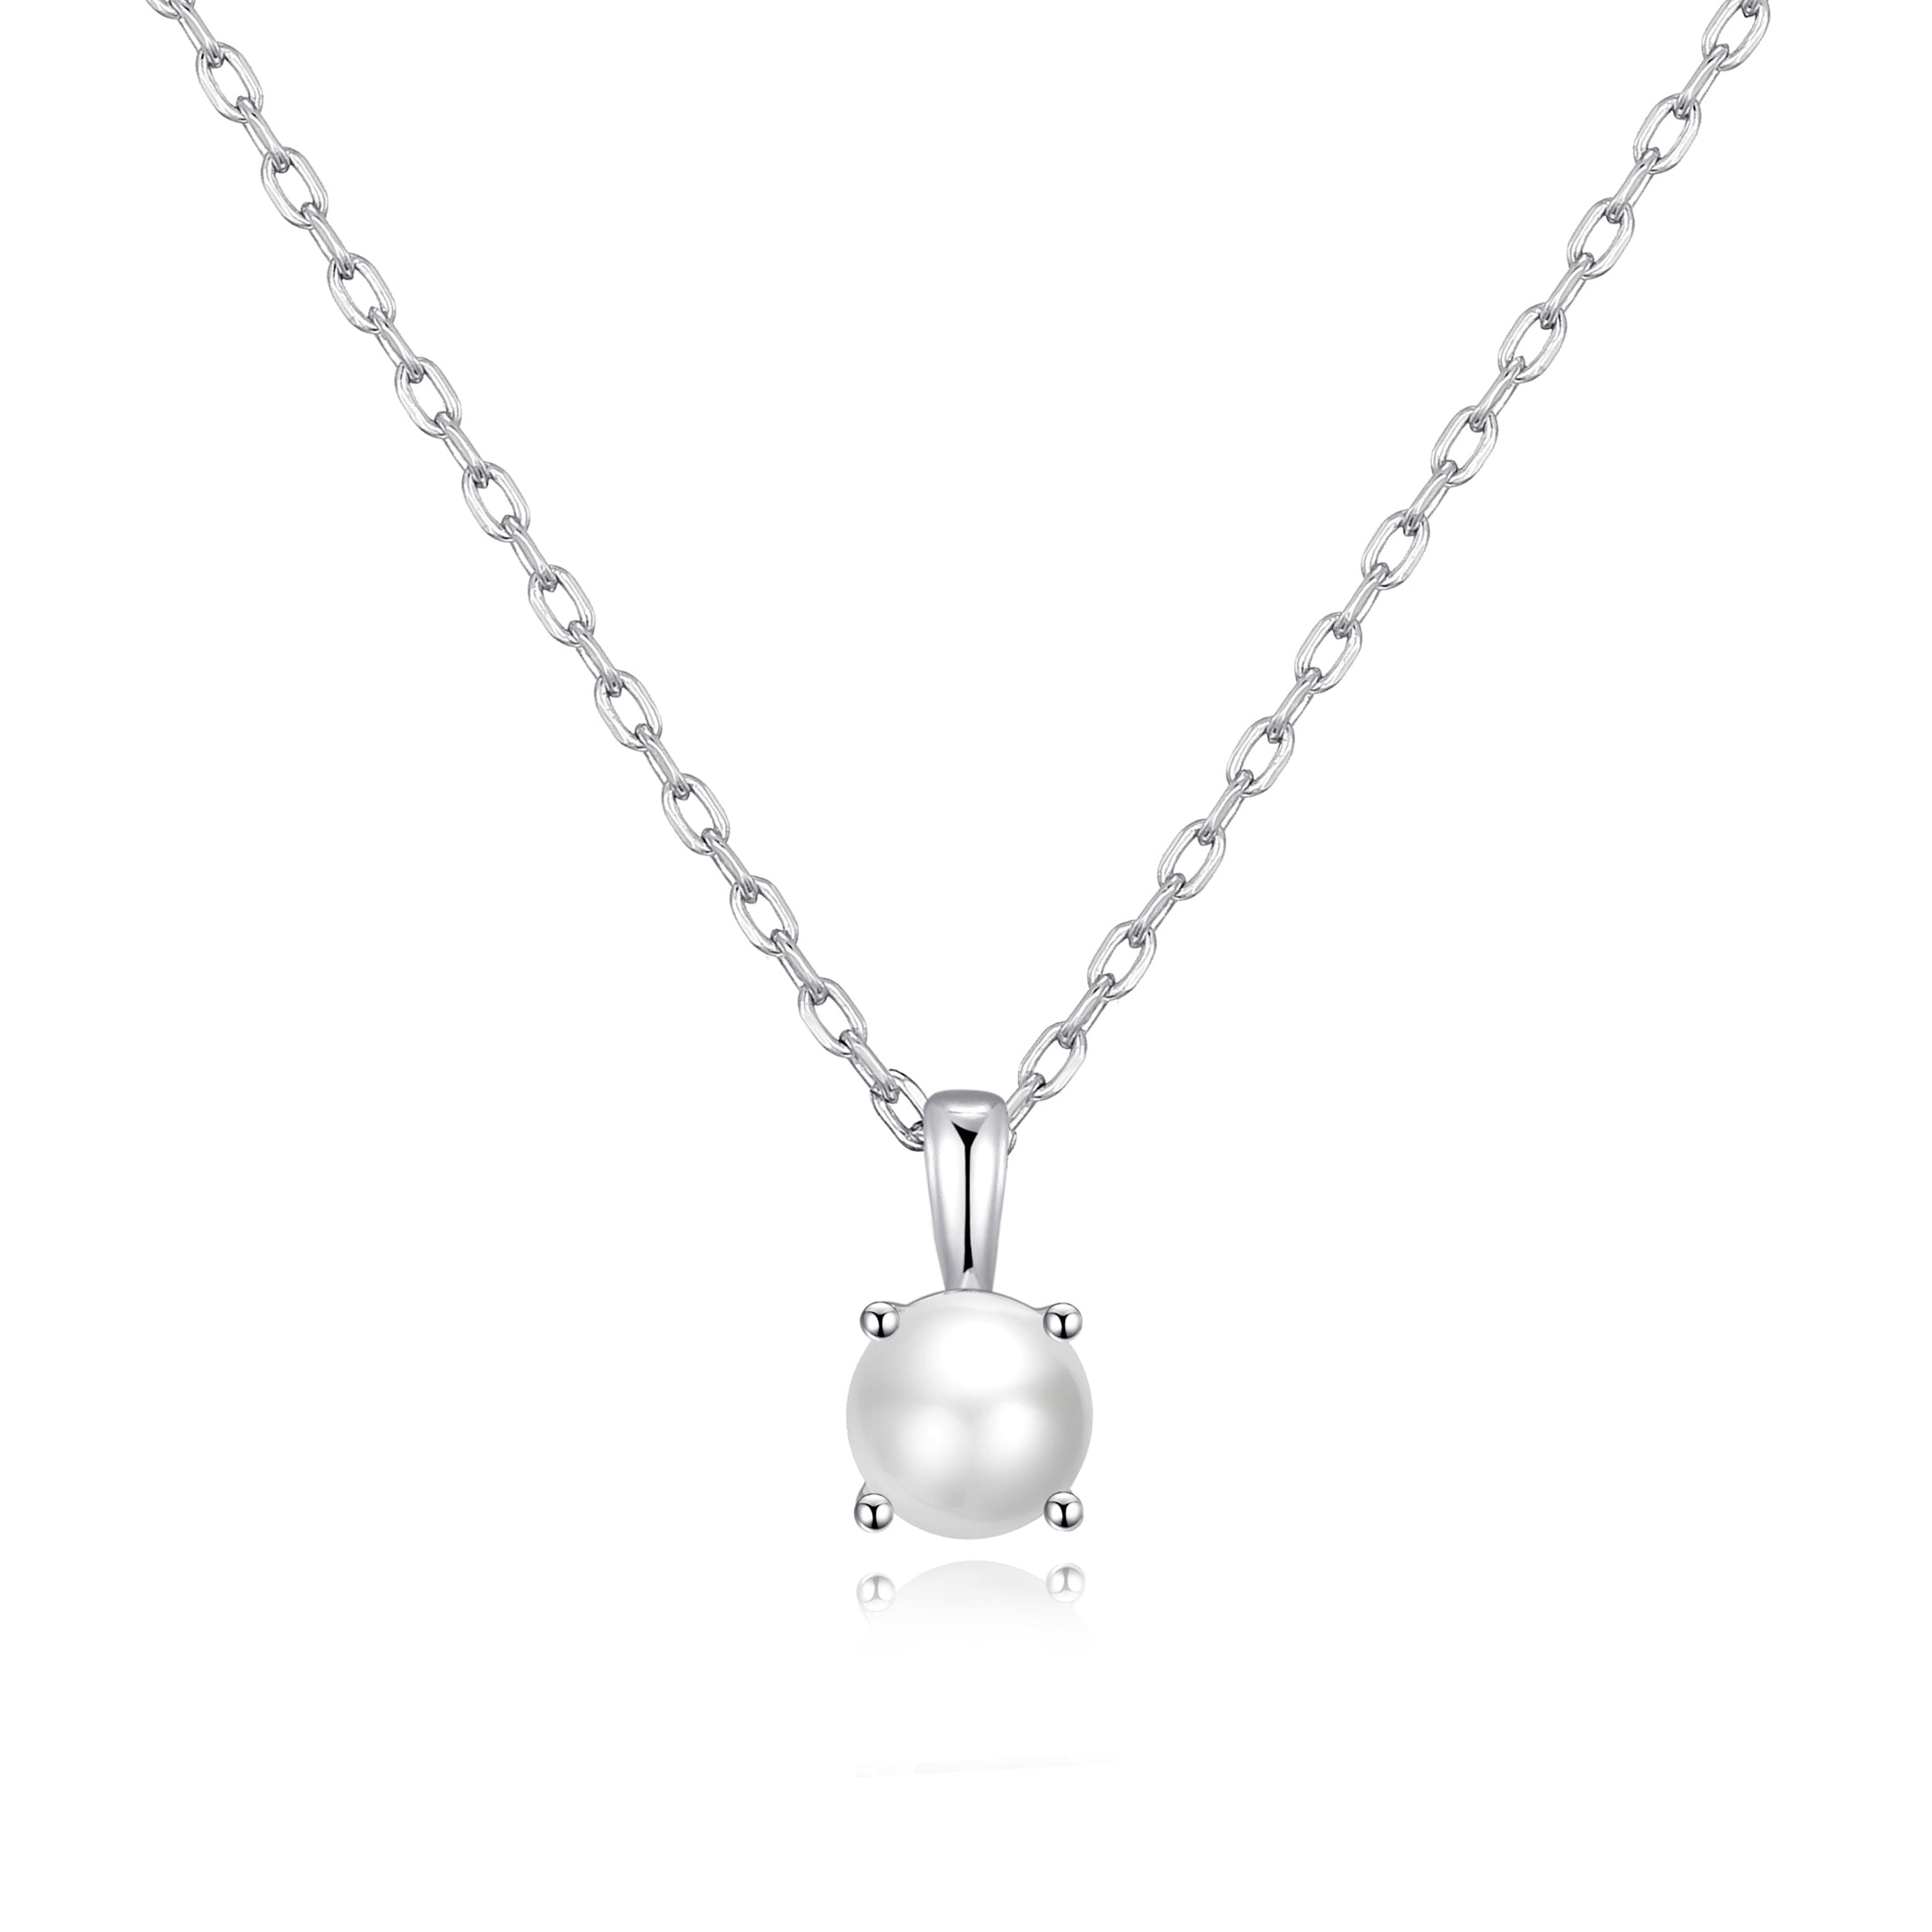 Sterling Silver June (Pearl) Birthstone Necklace Created with Gemstones from Zircondia® by Philip Jones Jewellery